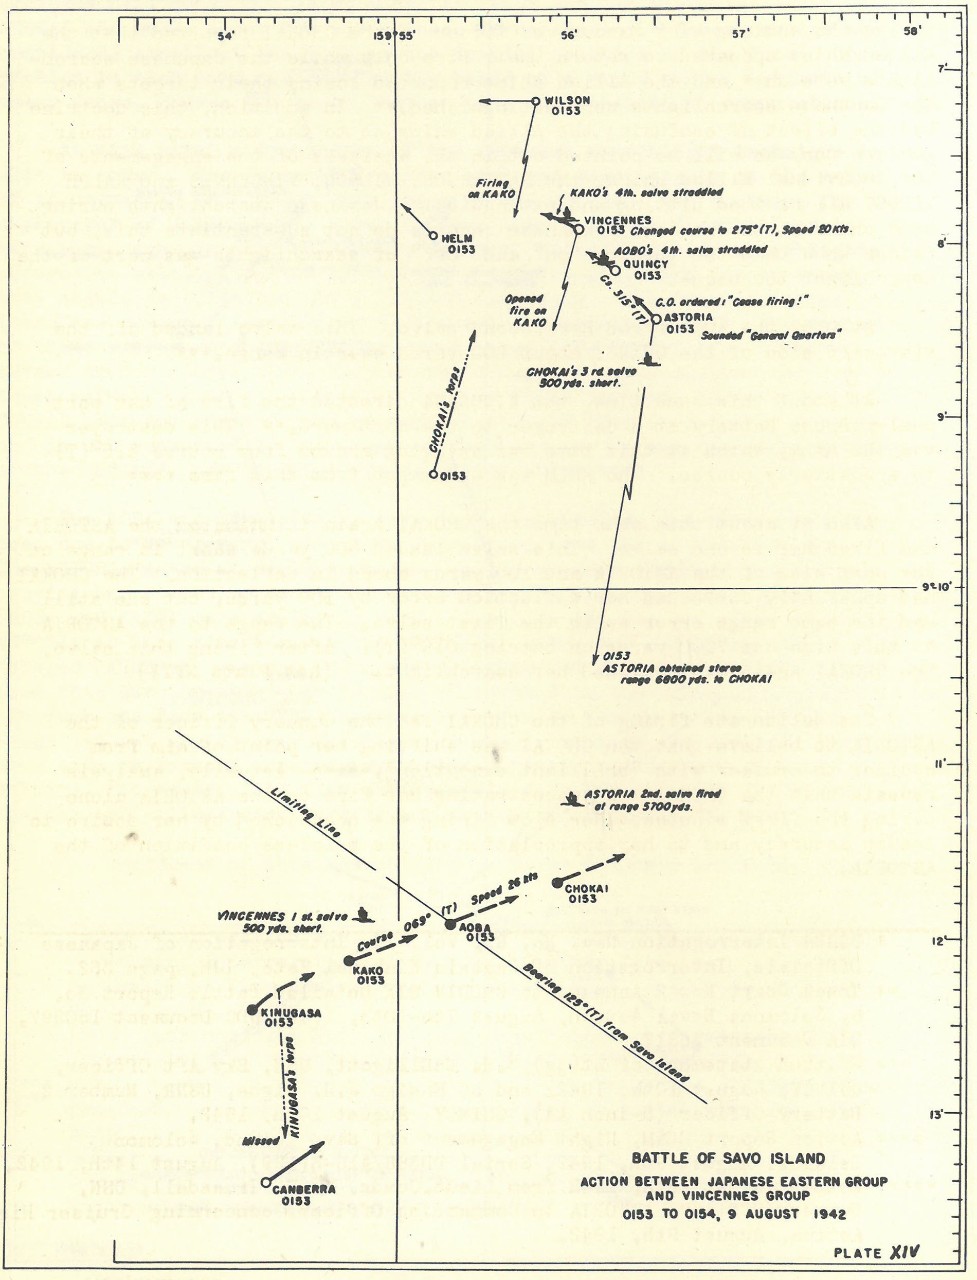 Plate 1: Battle of Savo Island, Action Between Japanese Eastern Group and Vincennes Group, 0153 to 0154, 9 August 1942 - chart - The Battle of Savo Island August 9, 1942 Strategical and Tactical Analysis